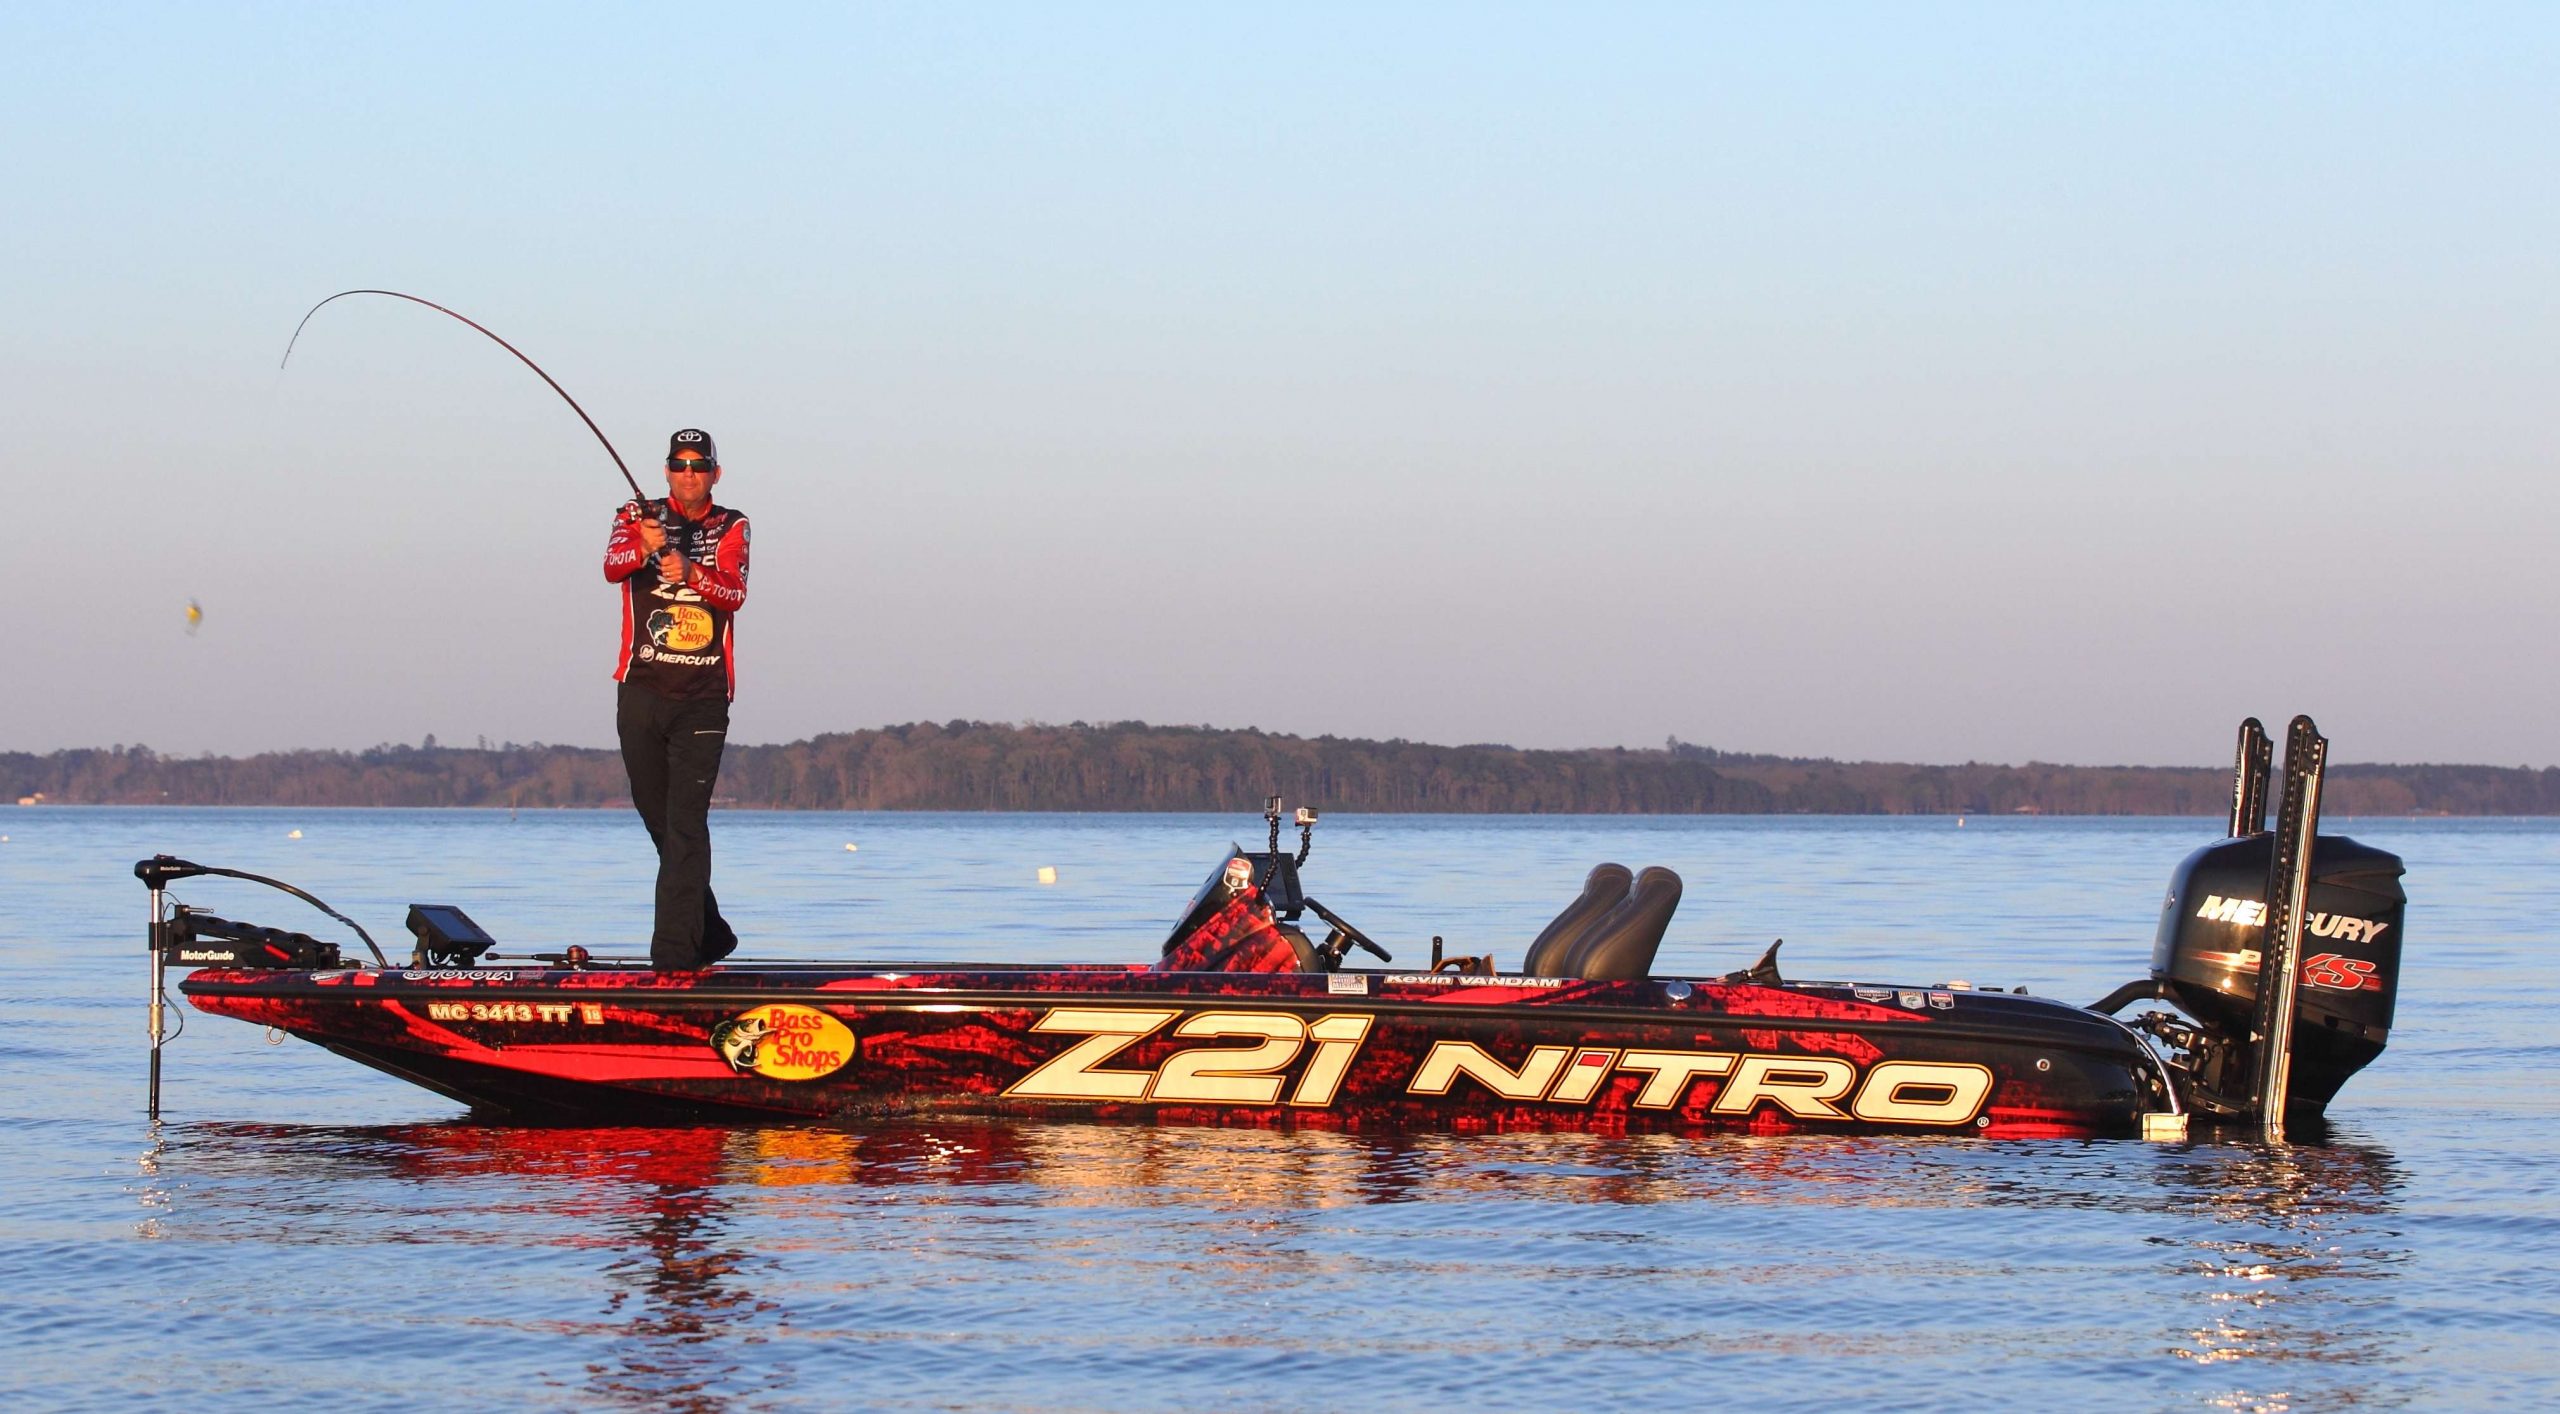 Bassmaster Elite Series pros need reliable rig to make their mortgage and truck payments and feed their families. The stakes are considerably higher. The stakes are arguably highest for the best in the business, Kevin VanDam. If he doesn't make check-in, people wonder what happened. If he doesn't catch a limit, people wonder if he's slipping. Rest assured, he's not. There's no more competitive angler on tour, possibly on the planet. As a guy who spends untold hours  in his boat each year, KVD knows what works and what doesn't. That's why the engineers at Nitro asked for his help - along with Edwin Evers, Brian Snowden, Rick Clunn, Timmy Horton and the rest of the Nitro team  - for input on making the most angler-friendly, tournament ready rig ever.